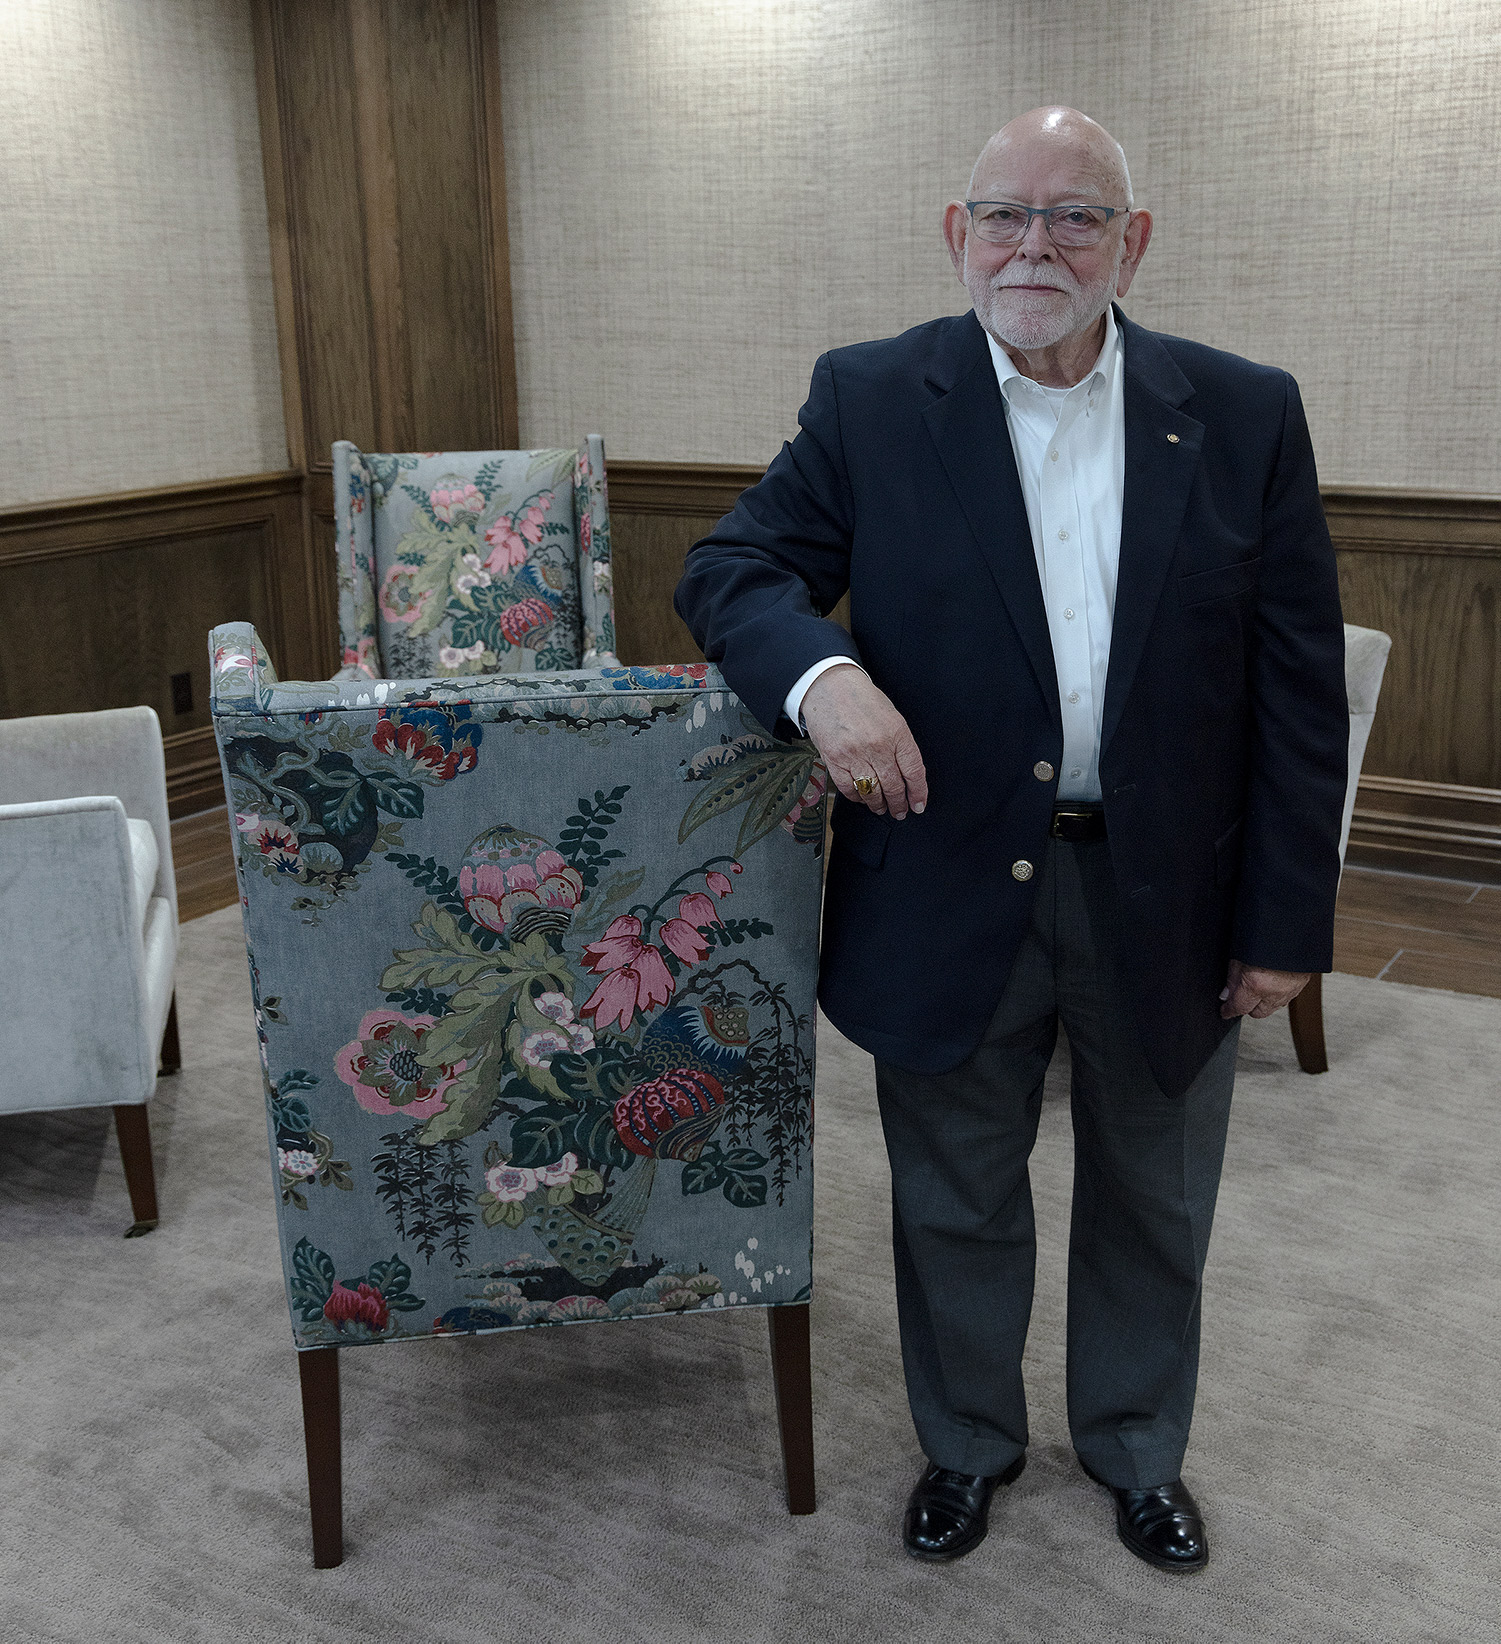 Larry Duffy smiling while standing next to a chair